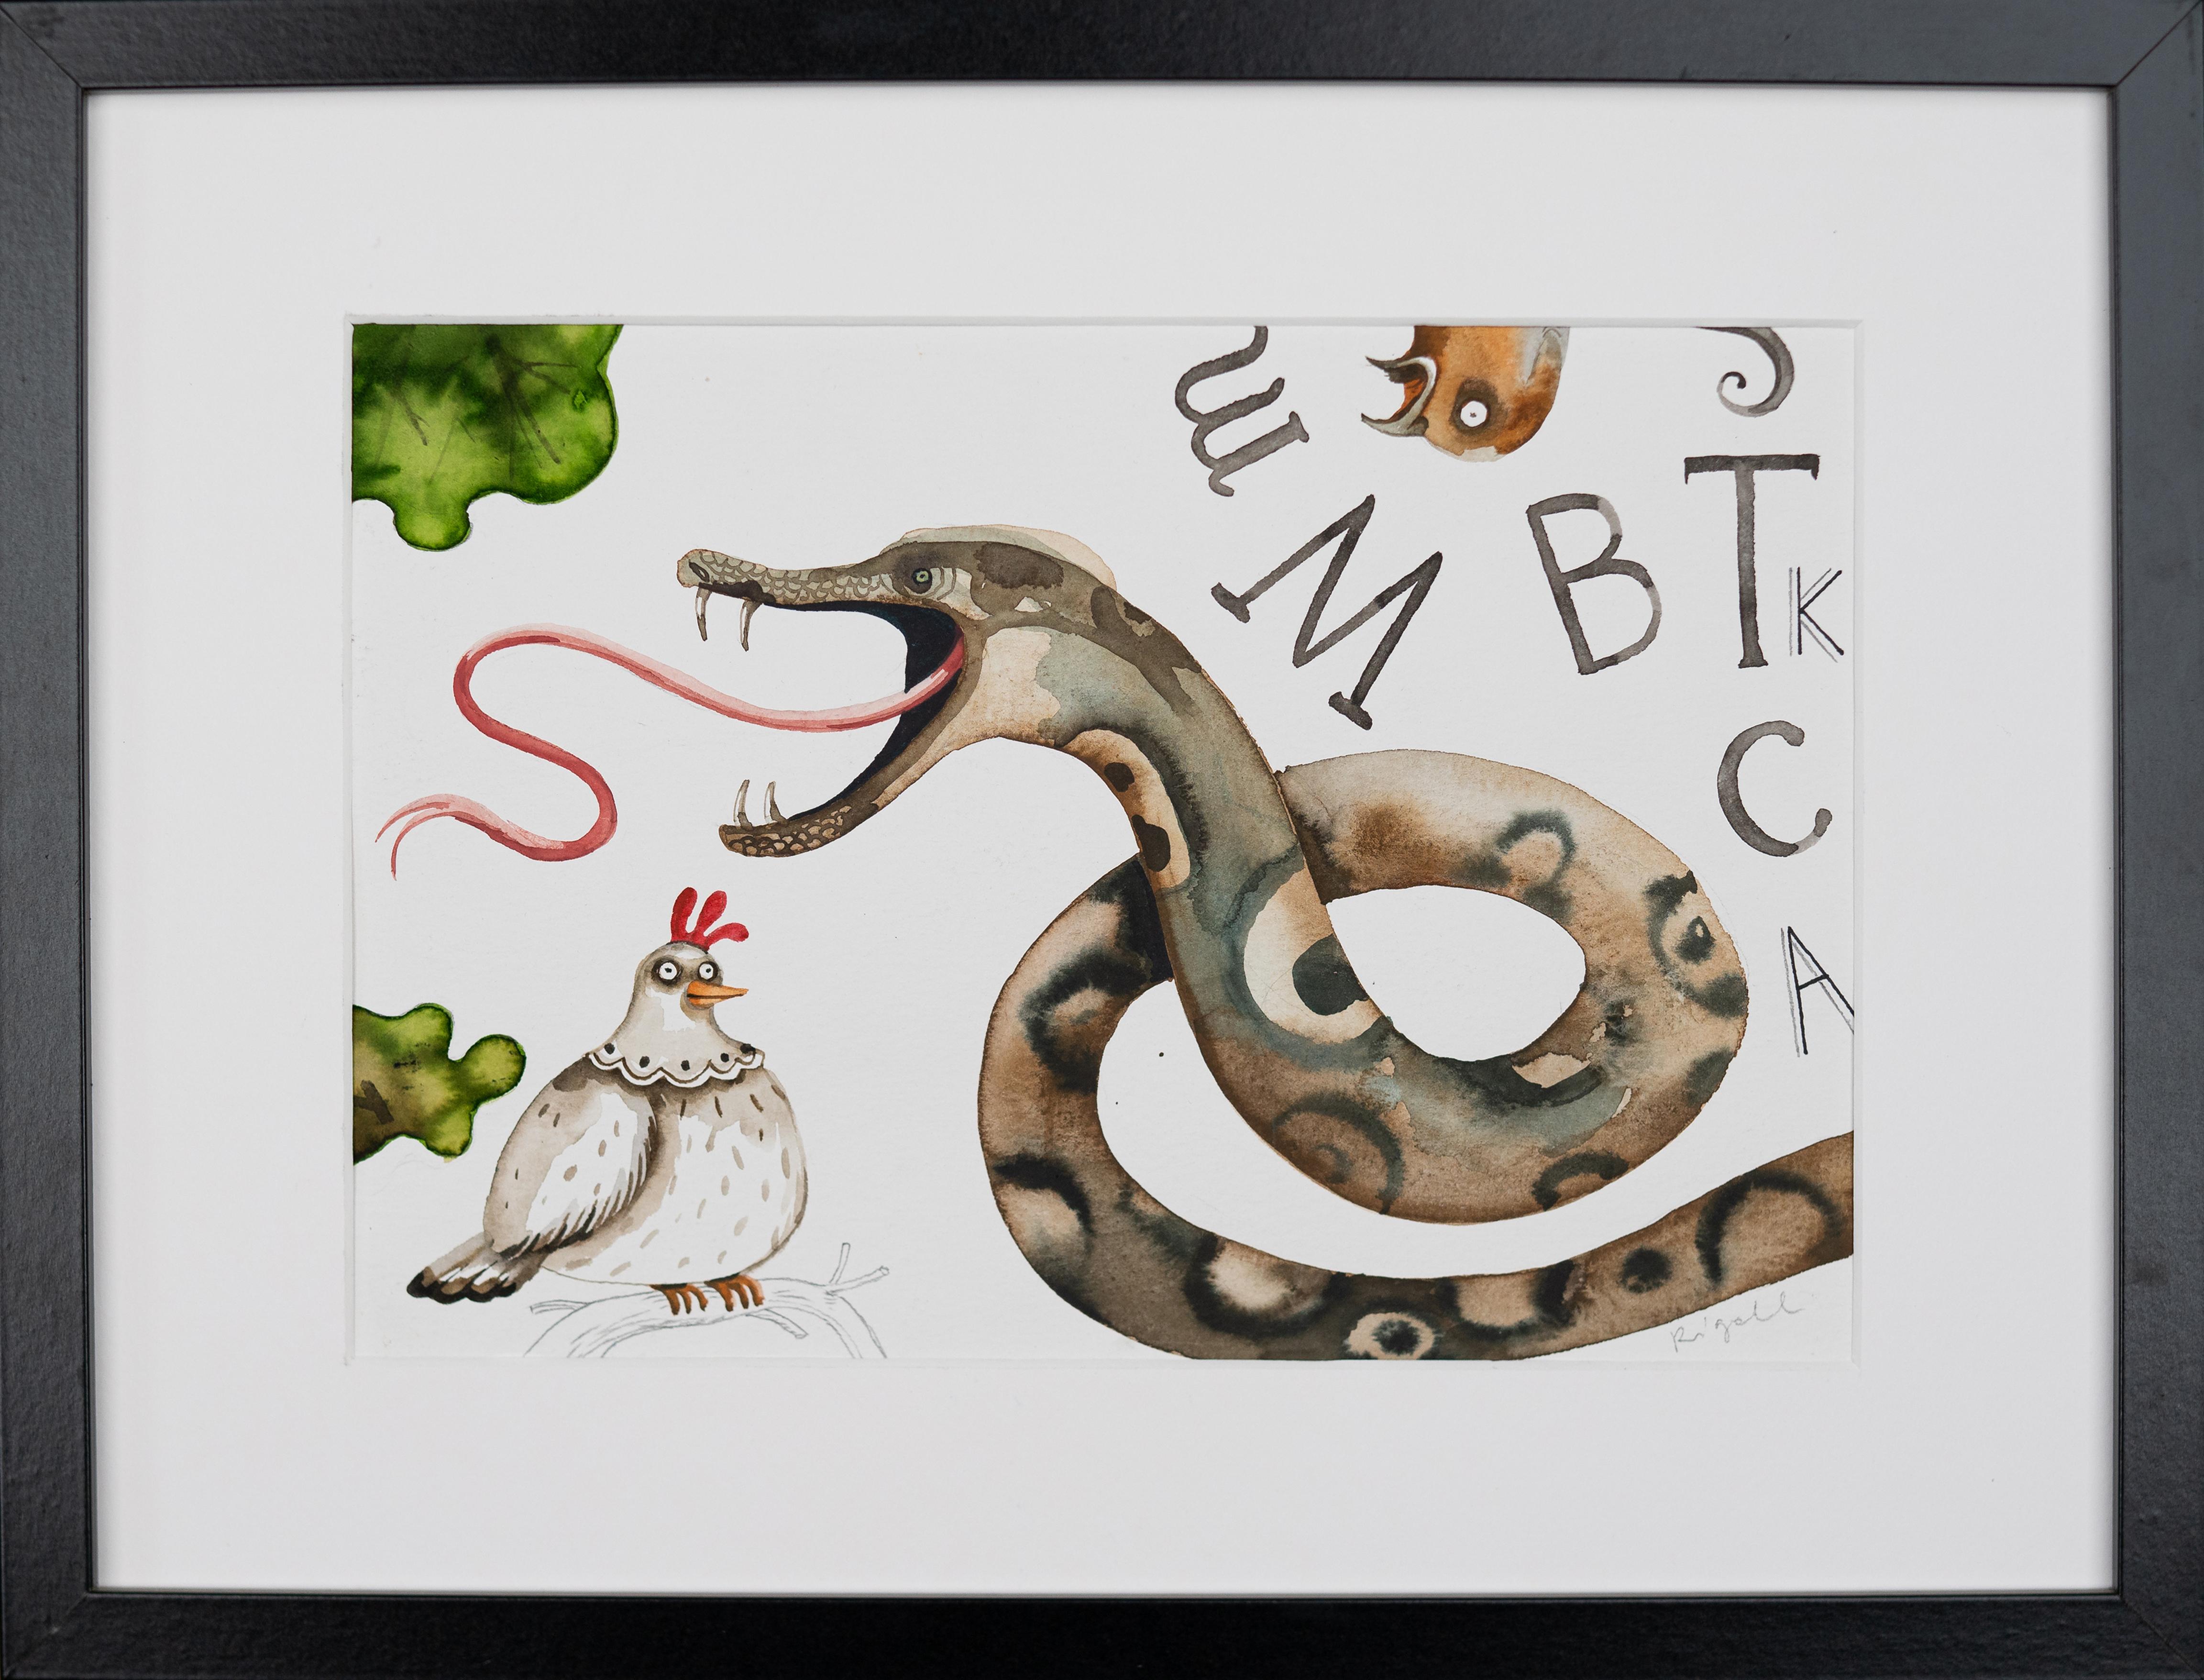 Grazyna Rigall Figurative Art - The Snake - Original Children Book Illustration Painting for "The man as he is"